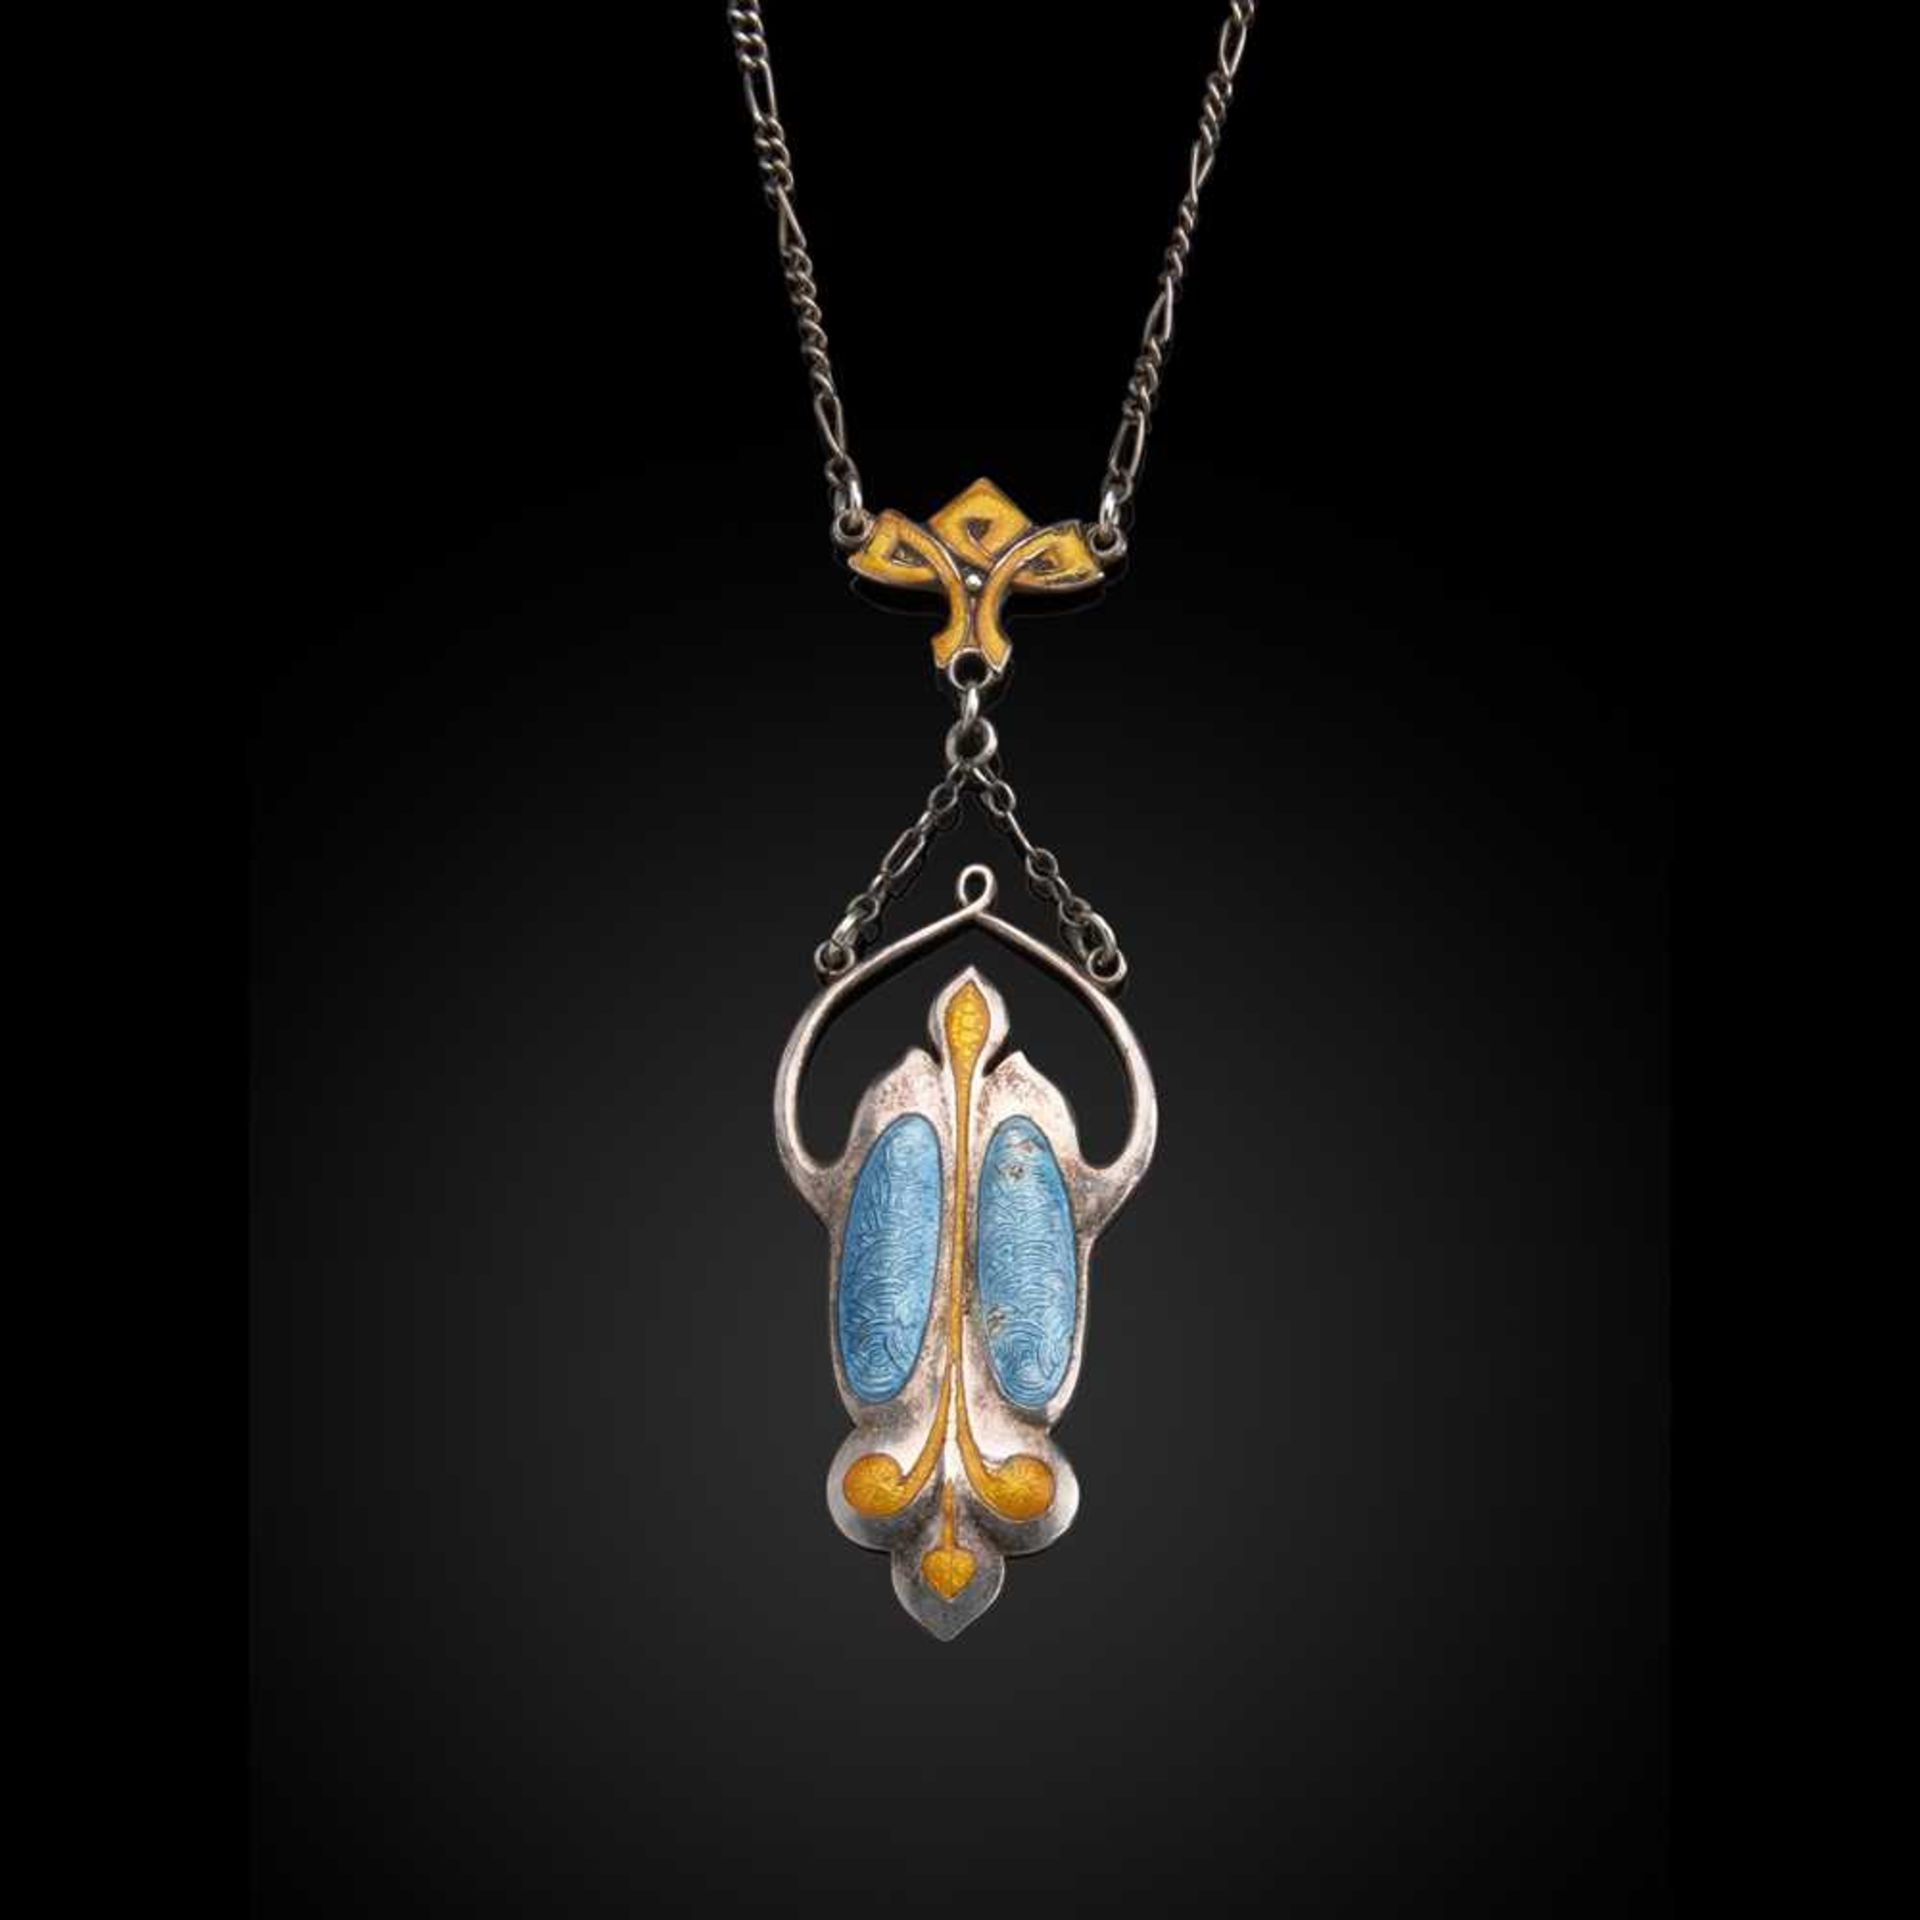 JESSIE MARION KING (BRITISH 1875-1949) (ATTRIBUTED TO), PROBABLY FOR LIBERTY & CO., LONDON PENDANT N - Image 3 of 3